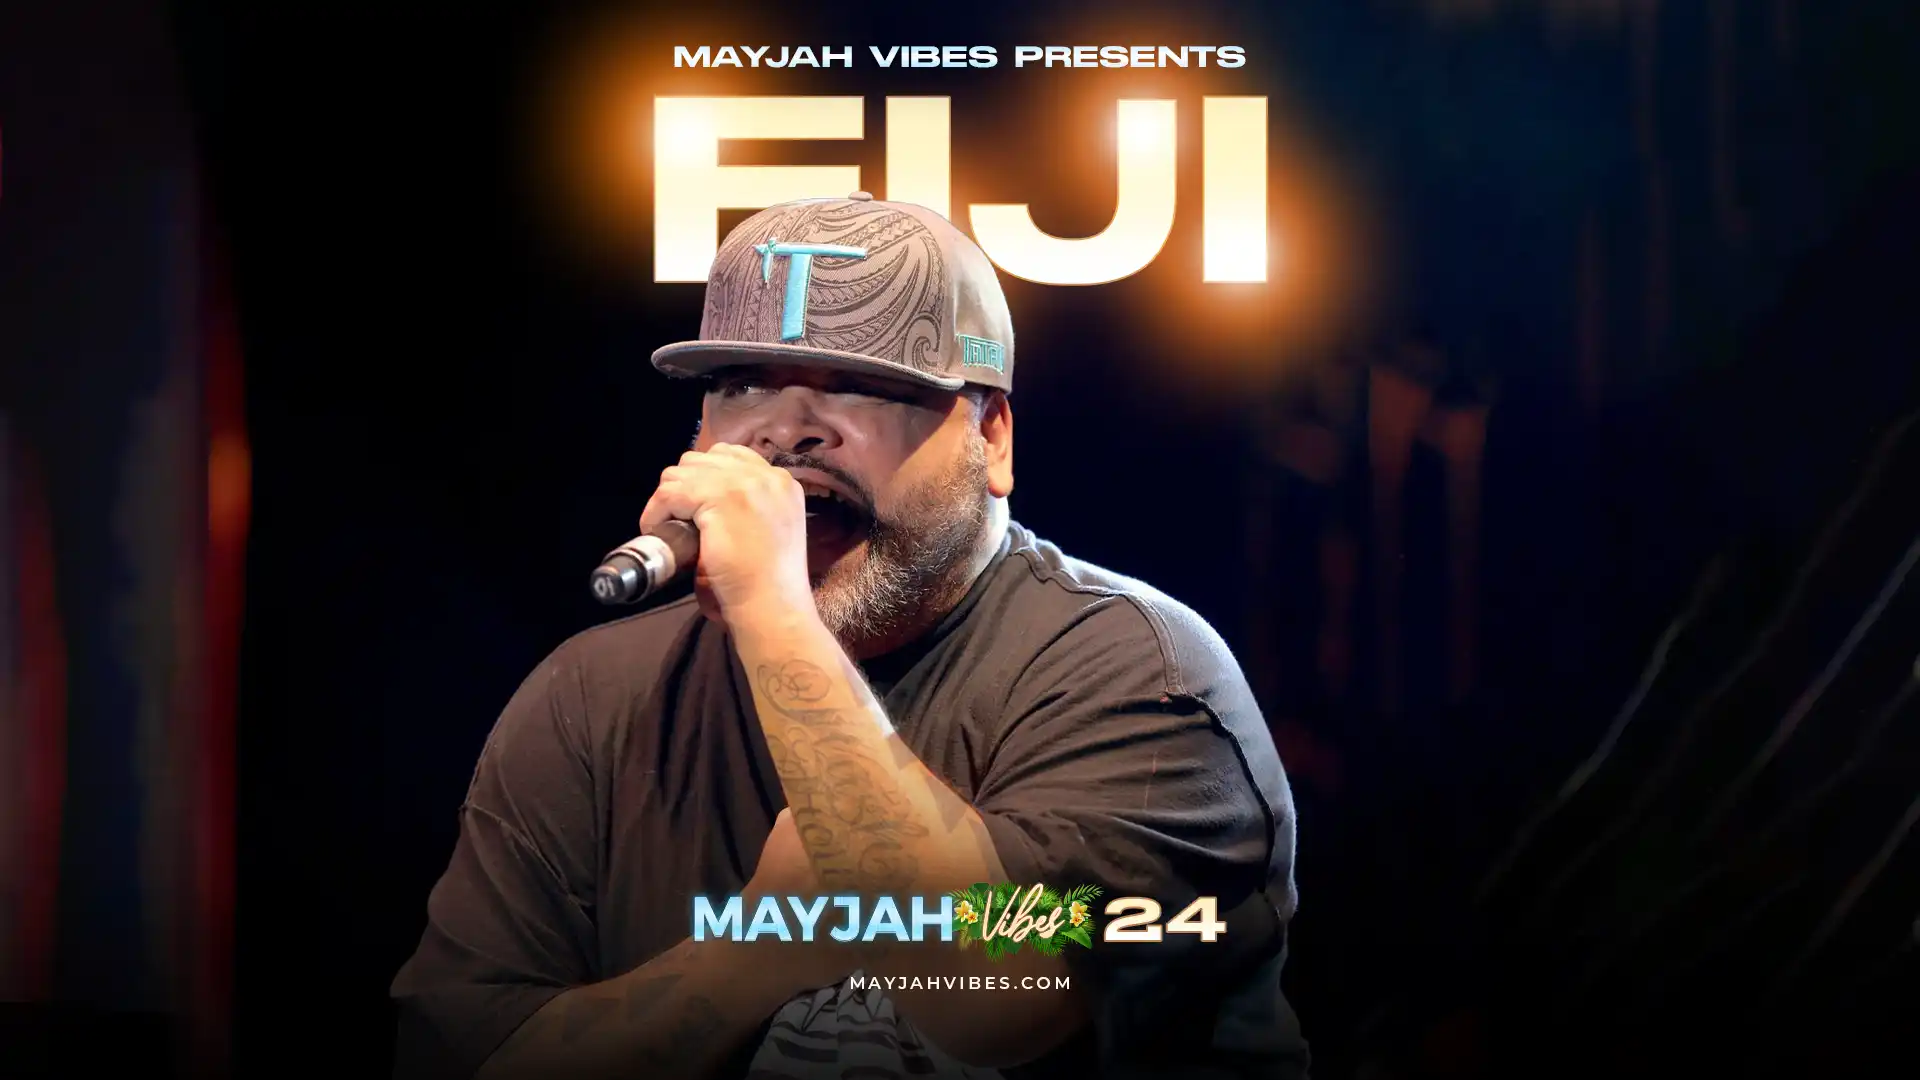 Fiji is set to make a return for Mayjah Vibes 2024 in Adelanto California